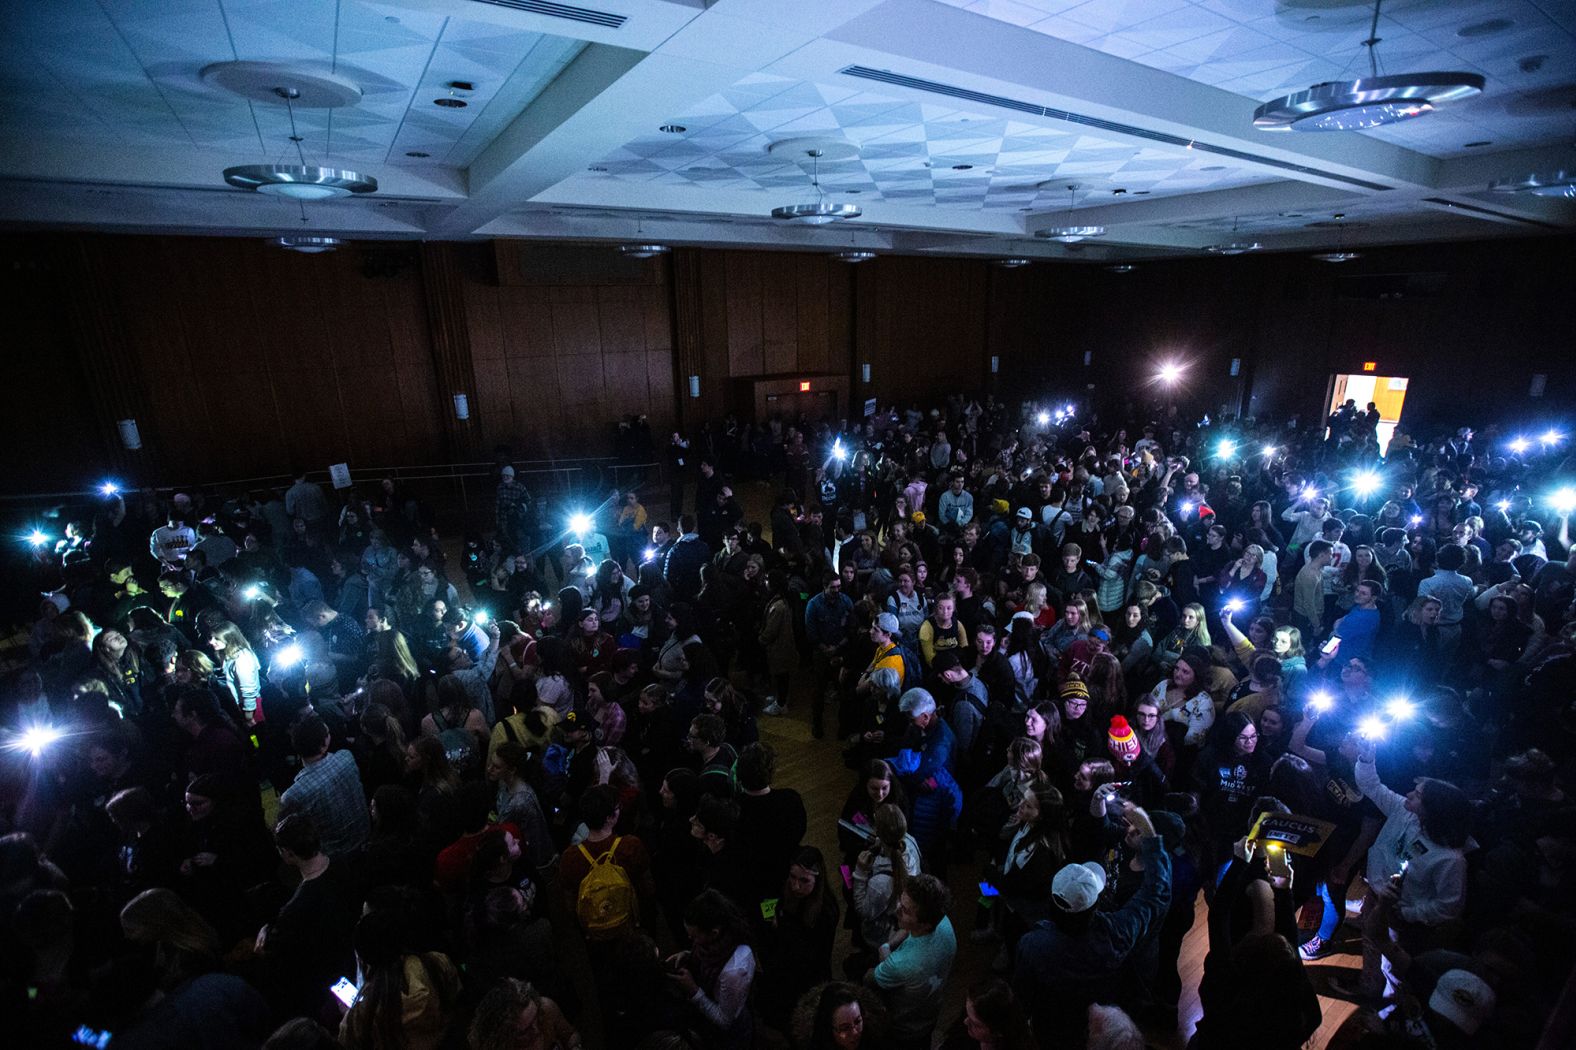 University of Iowa students shine their phone lights after the overhead lights went out during a caucus in Iowa City.